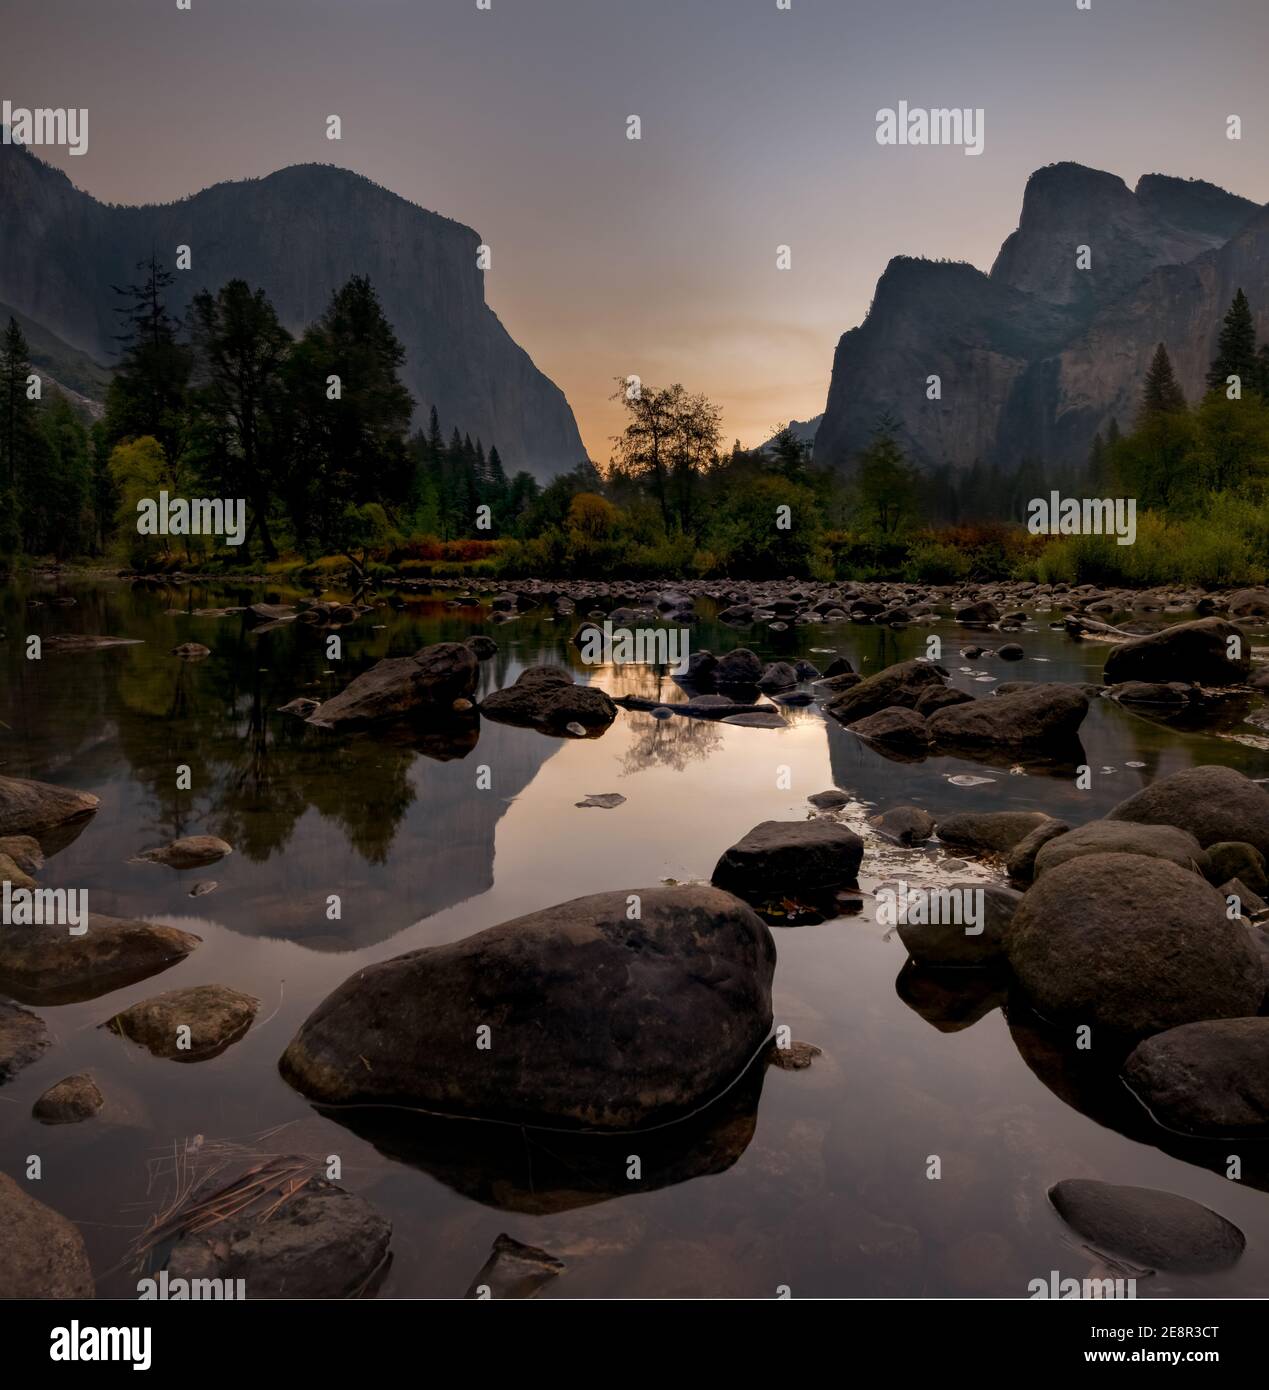 Sunrise at Yosemite Valley Viewpoint. Rocks in river foreground.  Stock Photo